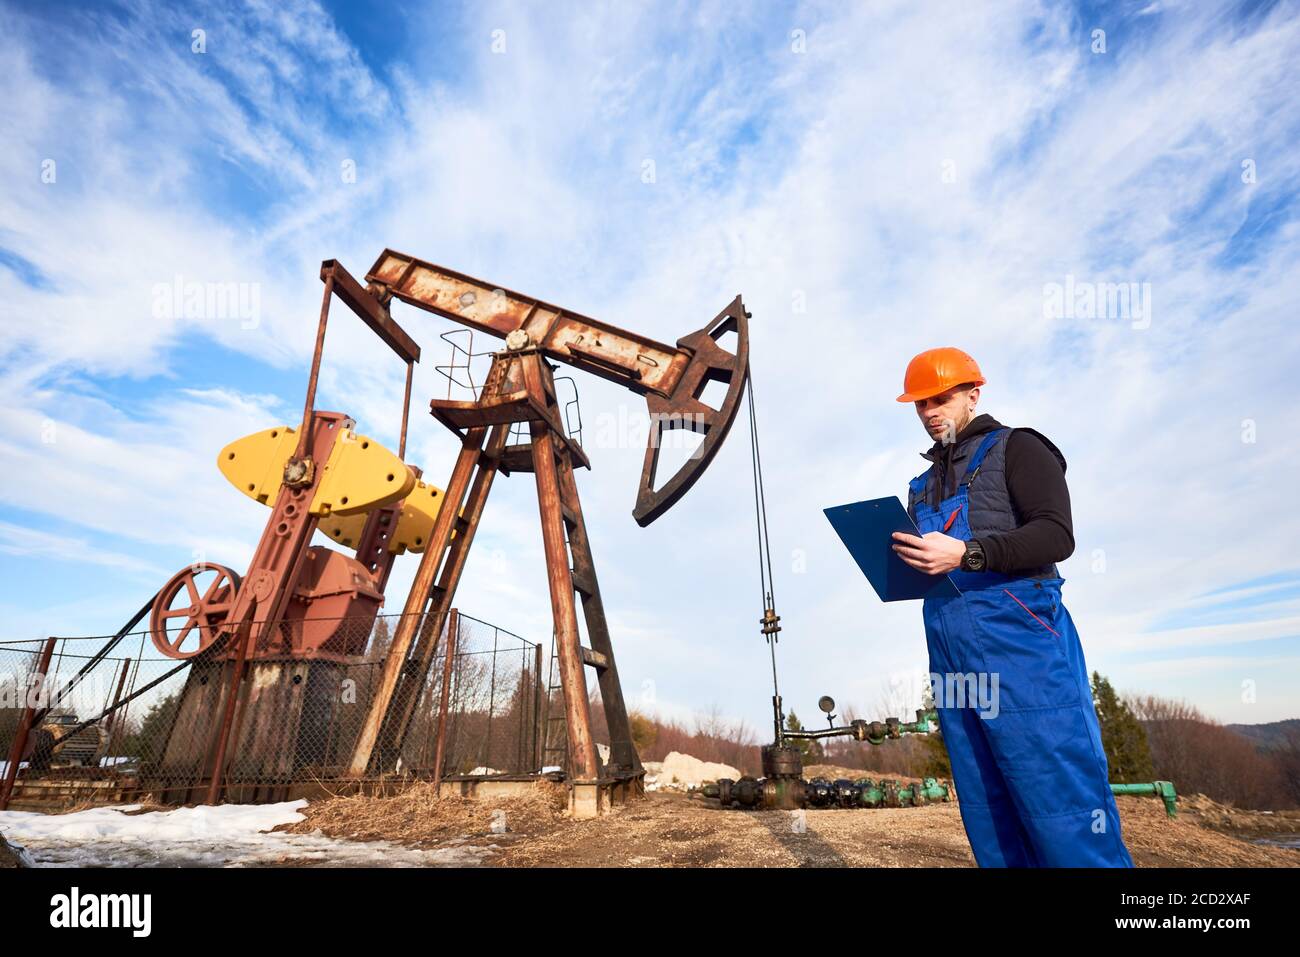 Petroleum engineer in work overalls and helmet holding clipboard, checking oil pumping unit, making notes. Oil worker standing near oil pump jack under beautiful sky. Concept of oil extraction Stock Photo